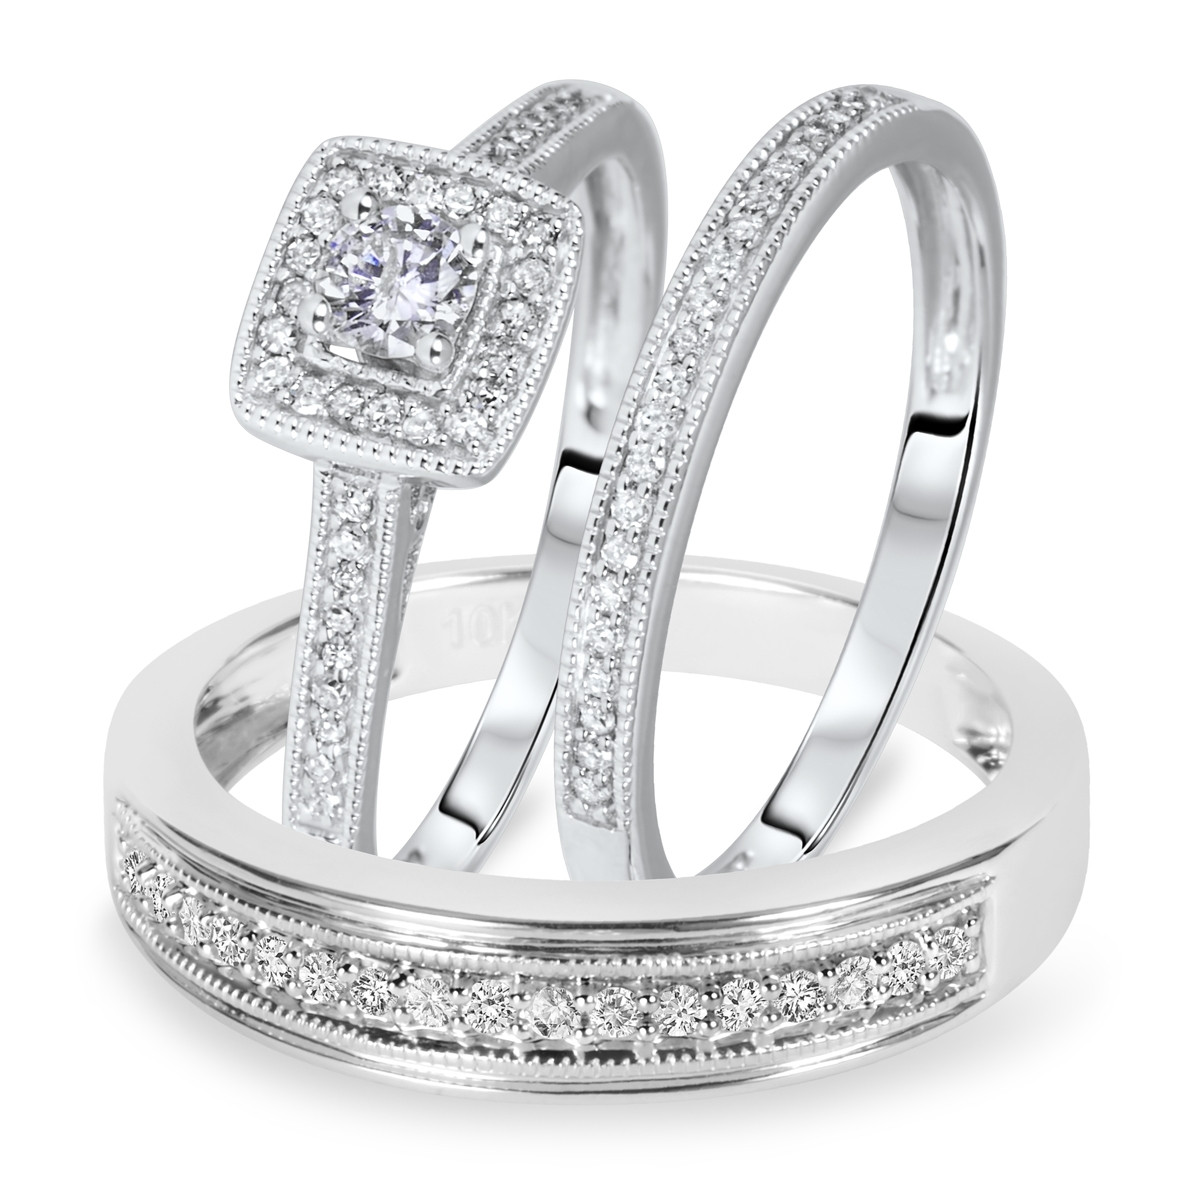 25 Ideas for Cheap Wedding Ring Sets His and Hers - Home, Family, Style and Art Ideas